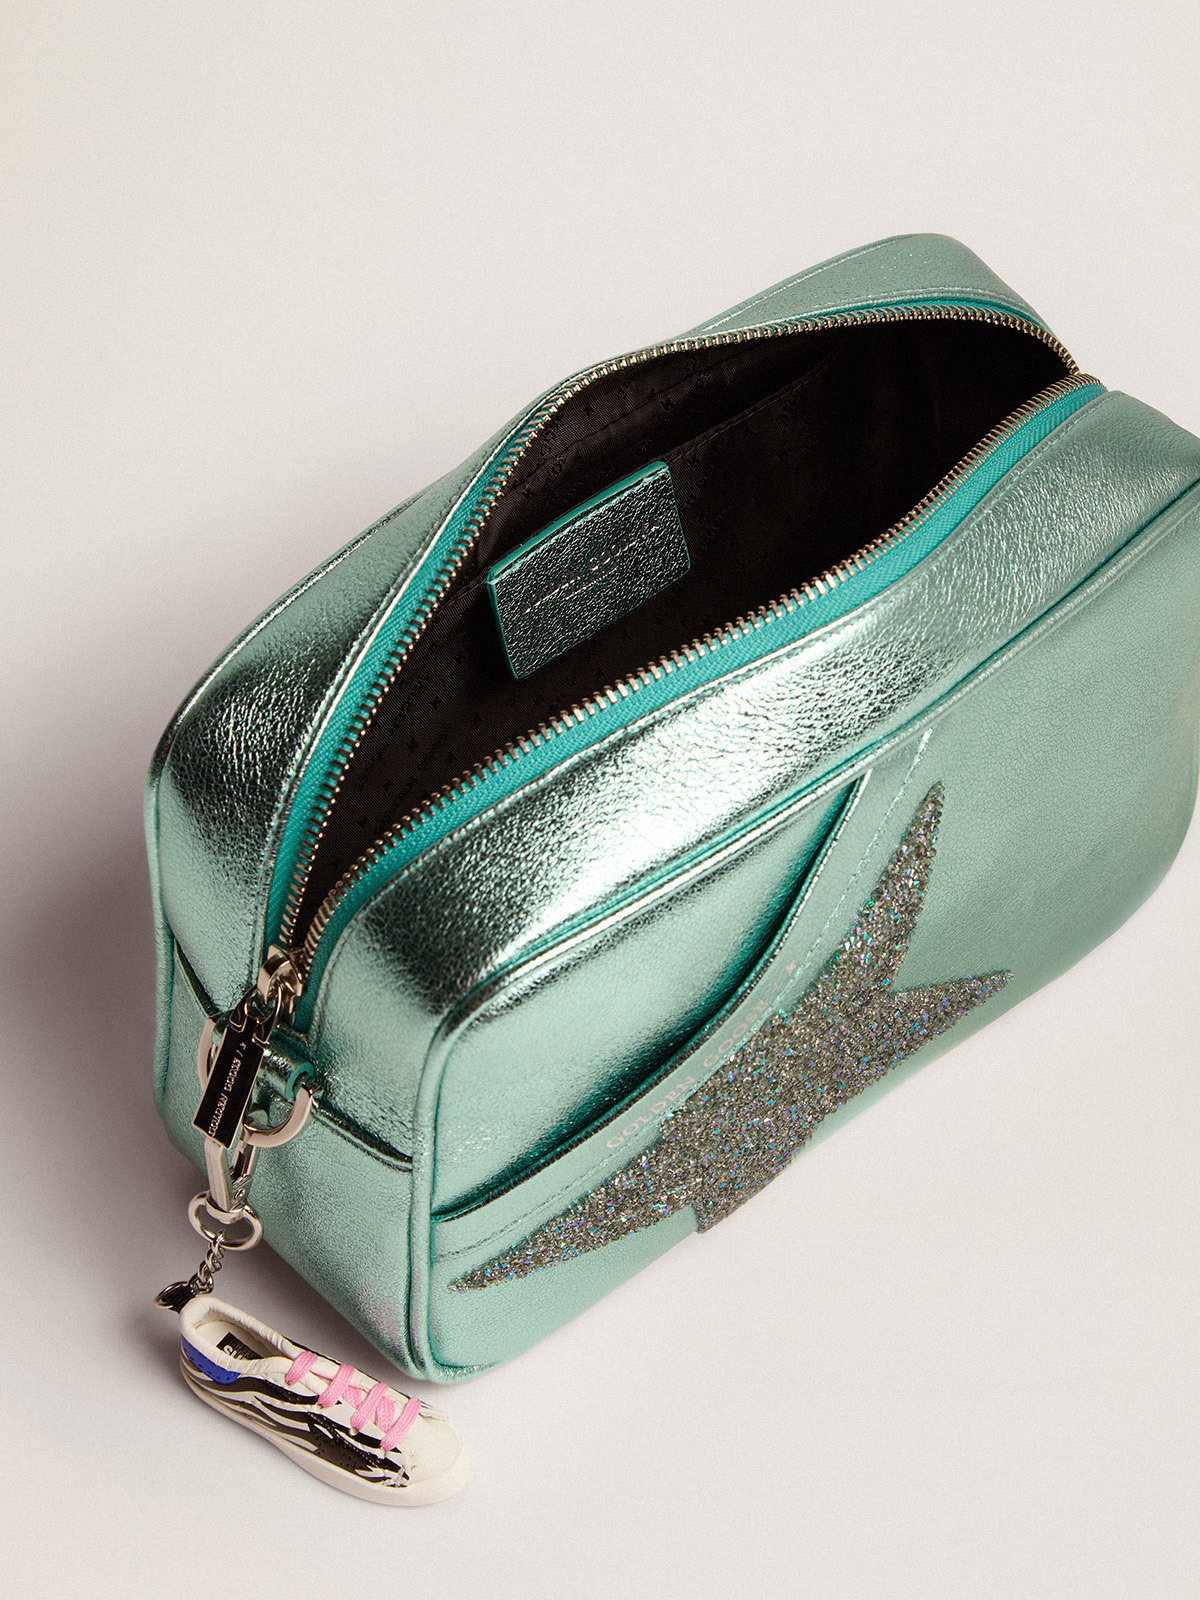 Women's Star Bag in turquoise leather with star in Swarovski